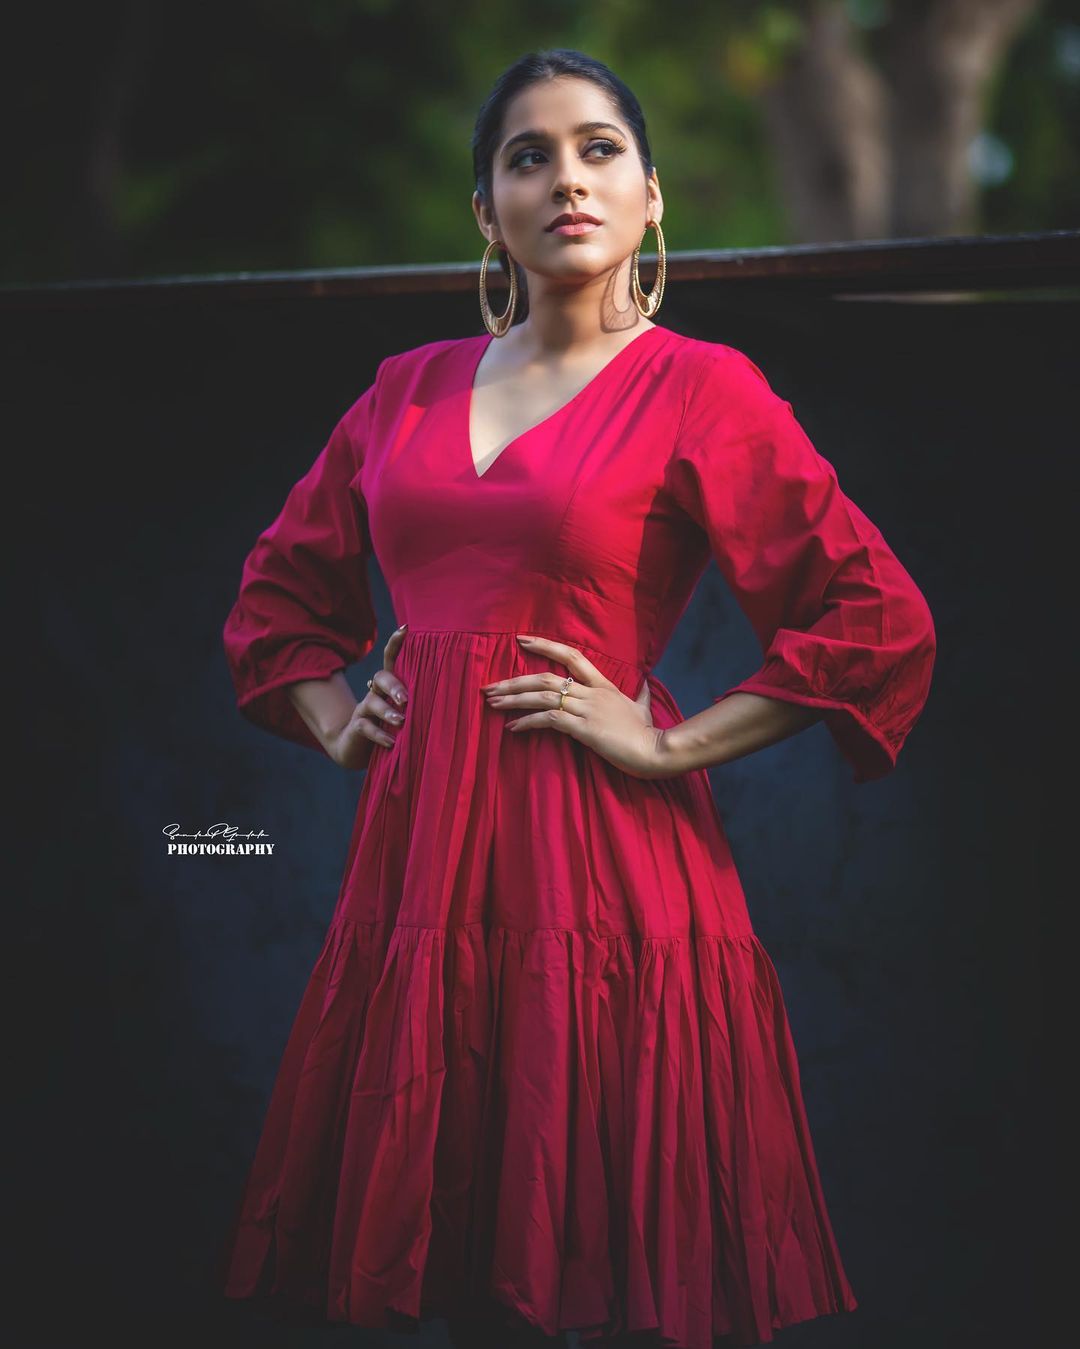 Anchor rashmi gautam latest hot trendy photo shoot images-Rashmigautam, Anchorrashmi, Rashmi Gautam Photos,Spicy Hot Pics,Images,High Resolution WallPapers Download